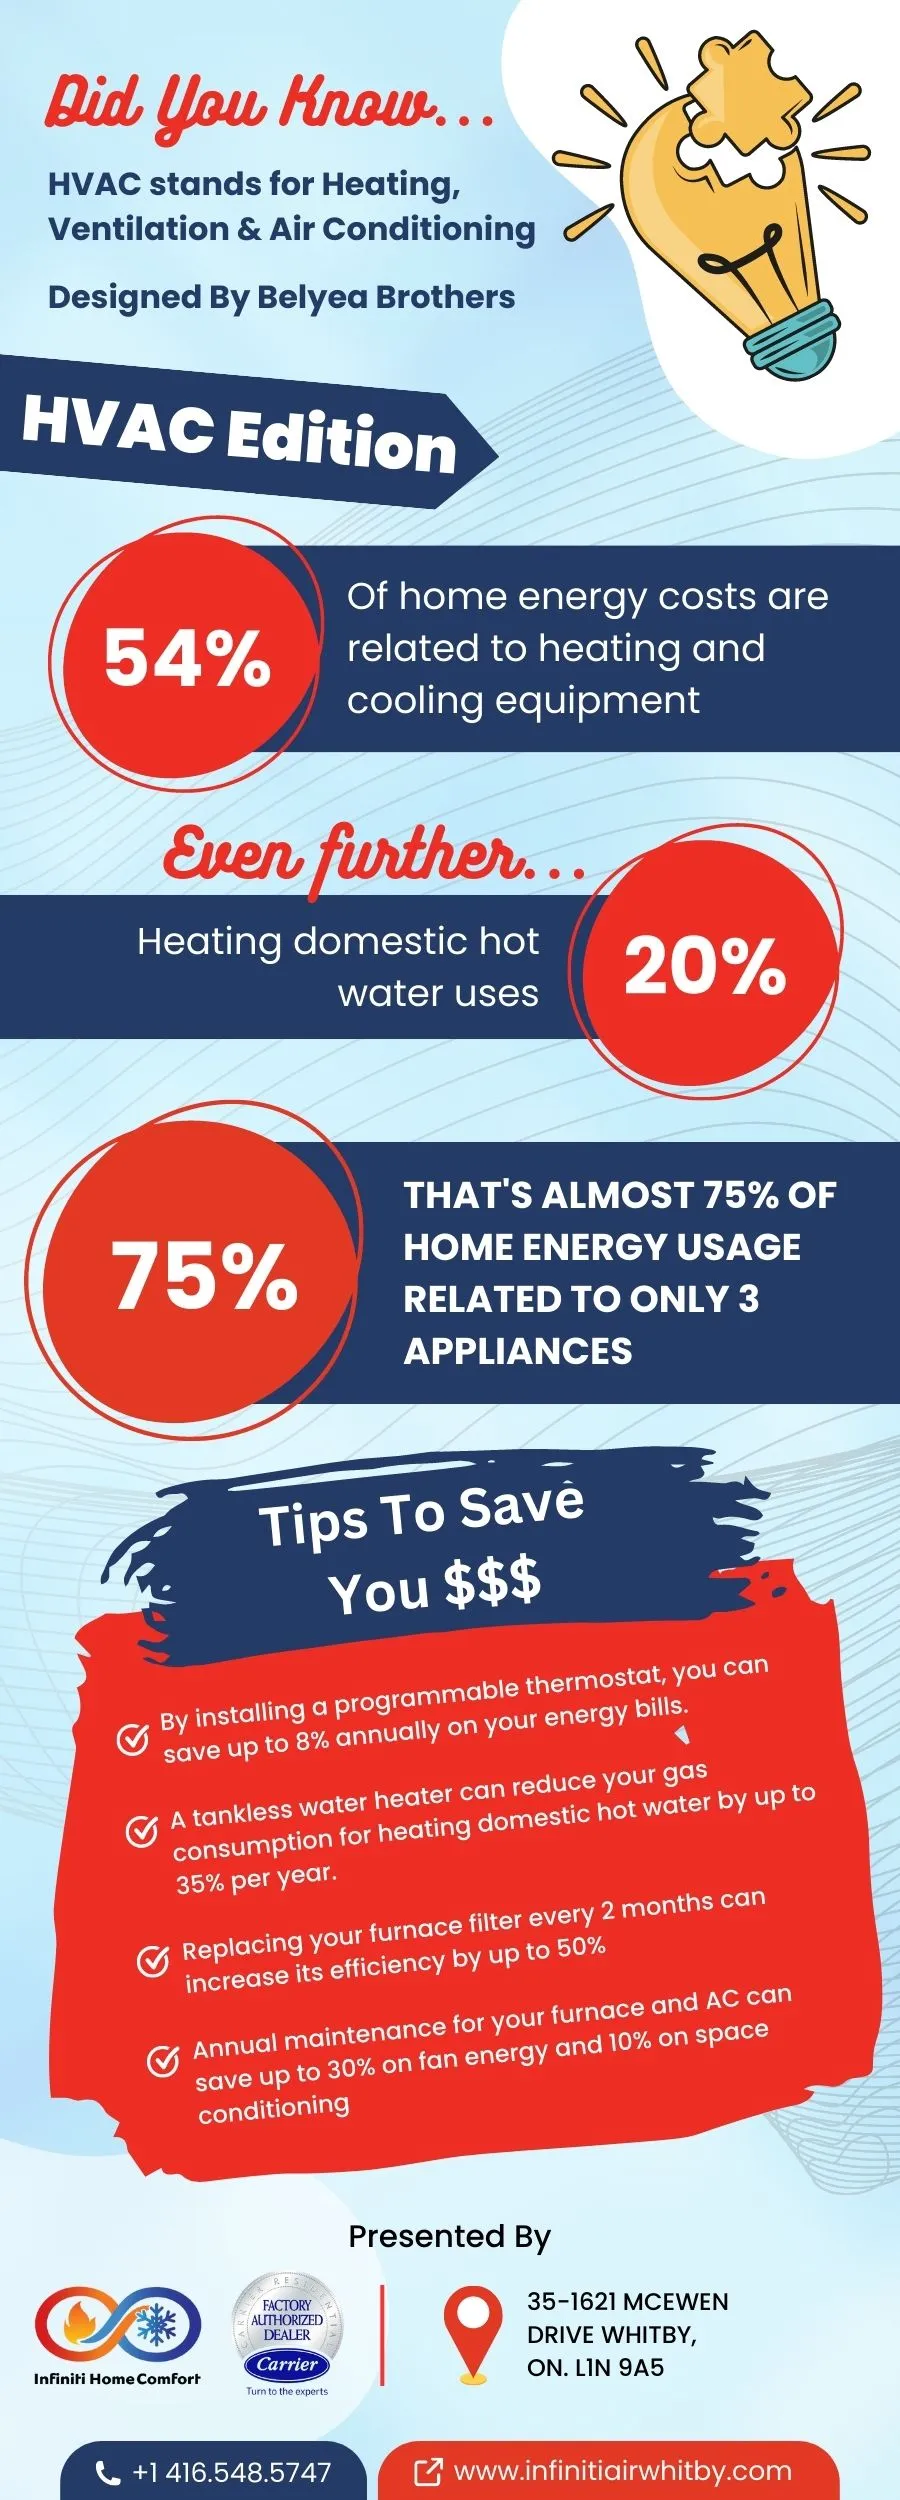 HVAC Facts You Should Know to Save Money on Energy Bills